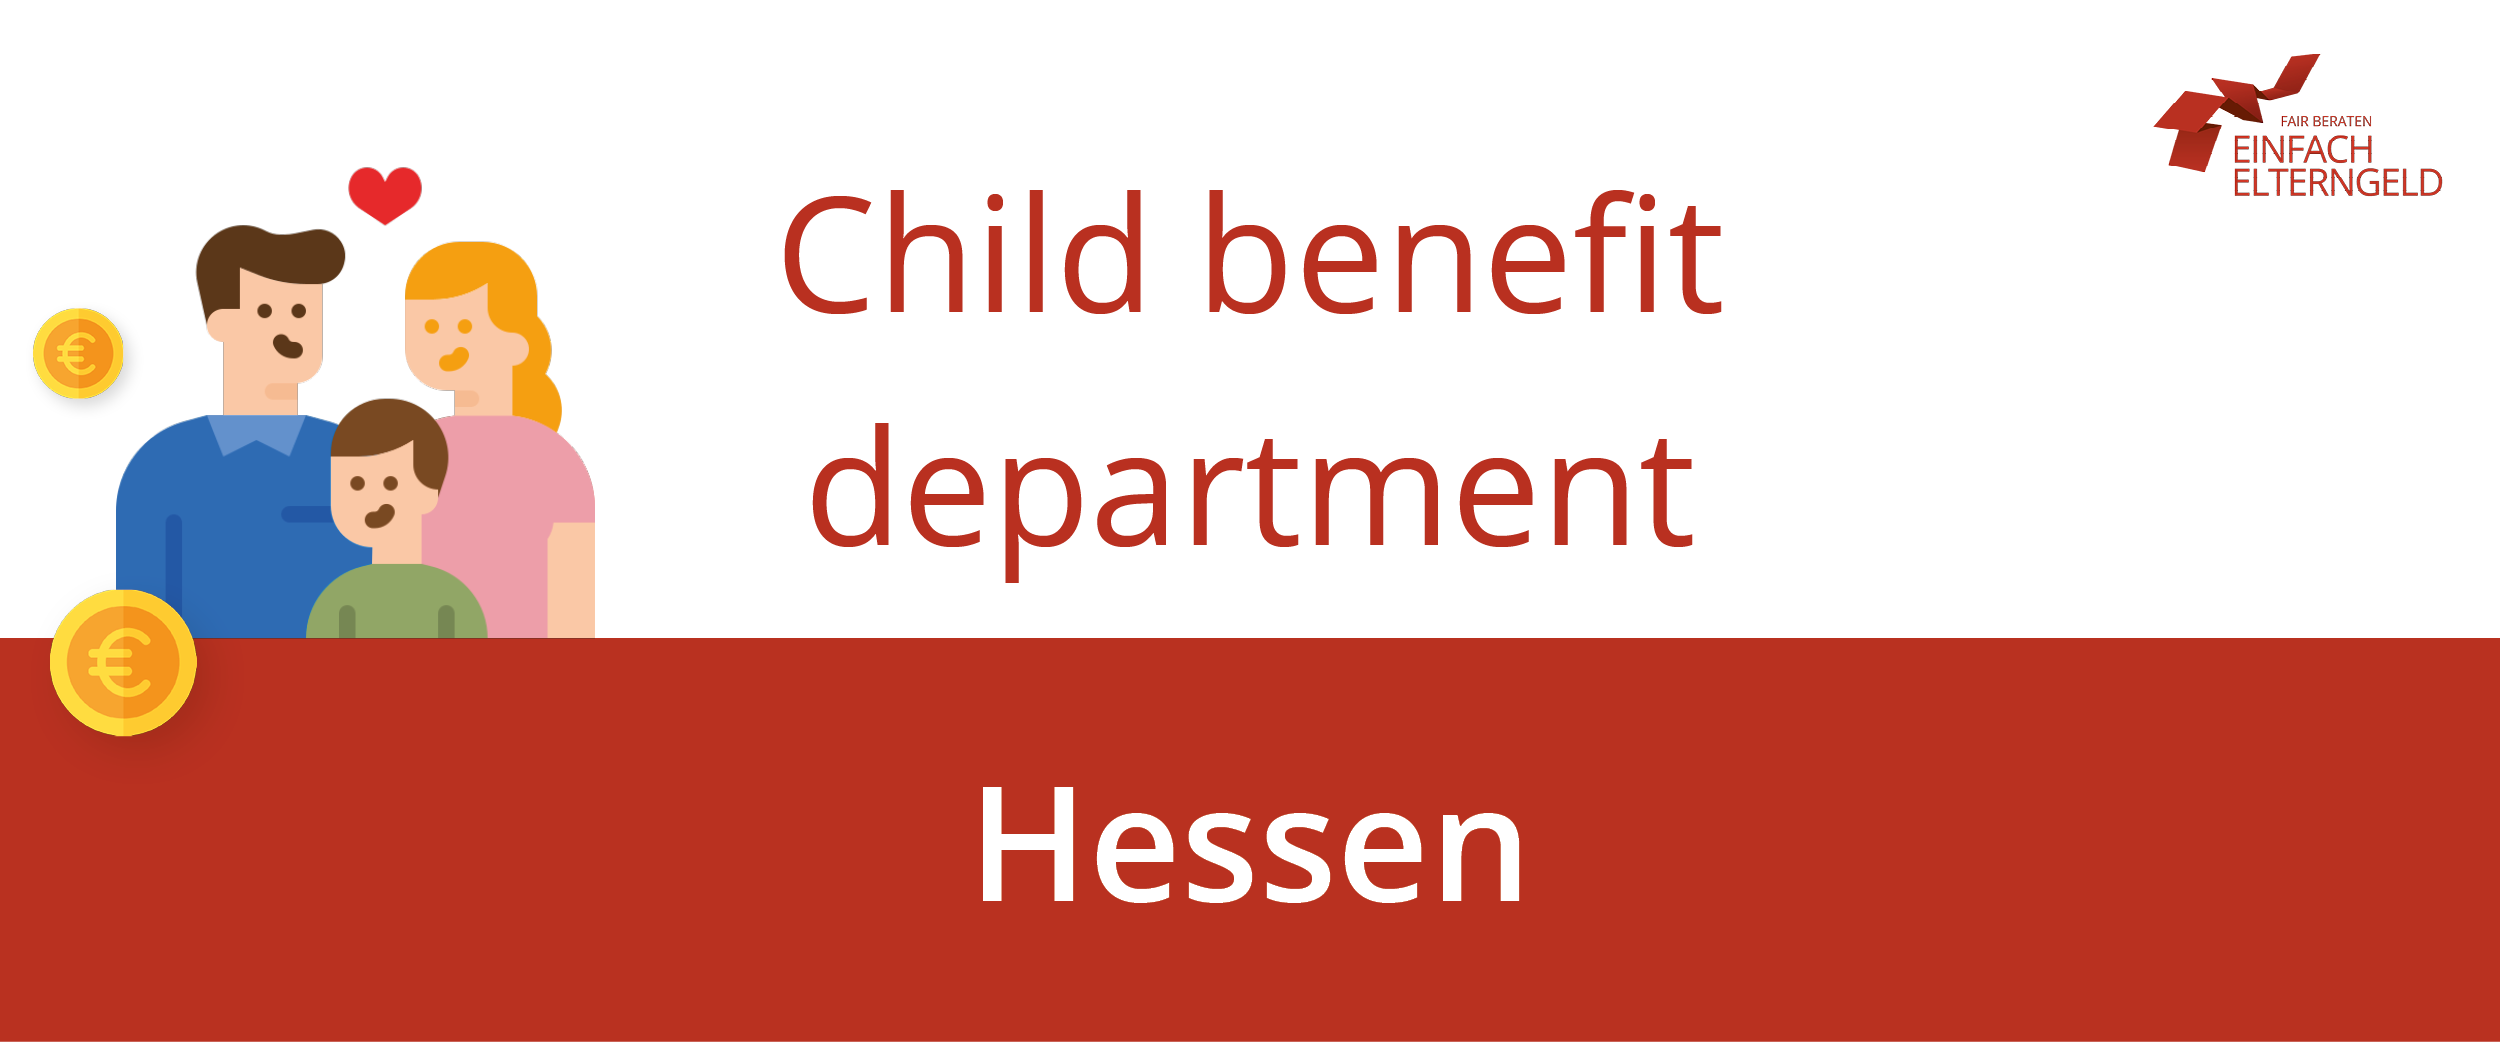 We introduce you to the child benefit department of Hessen.